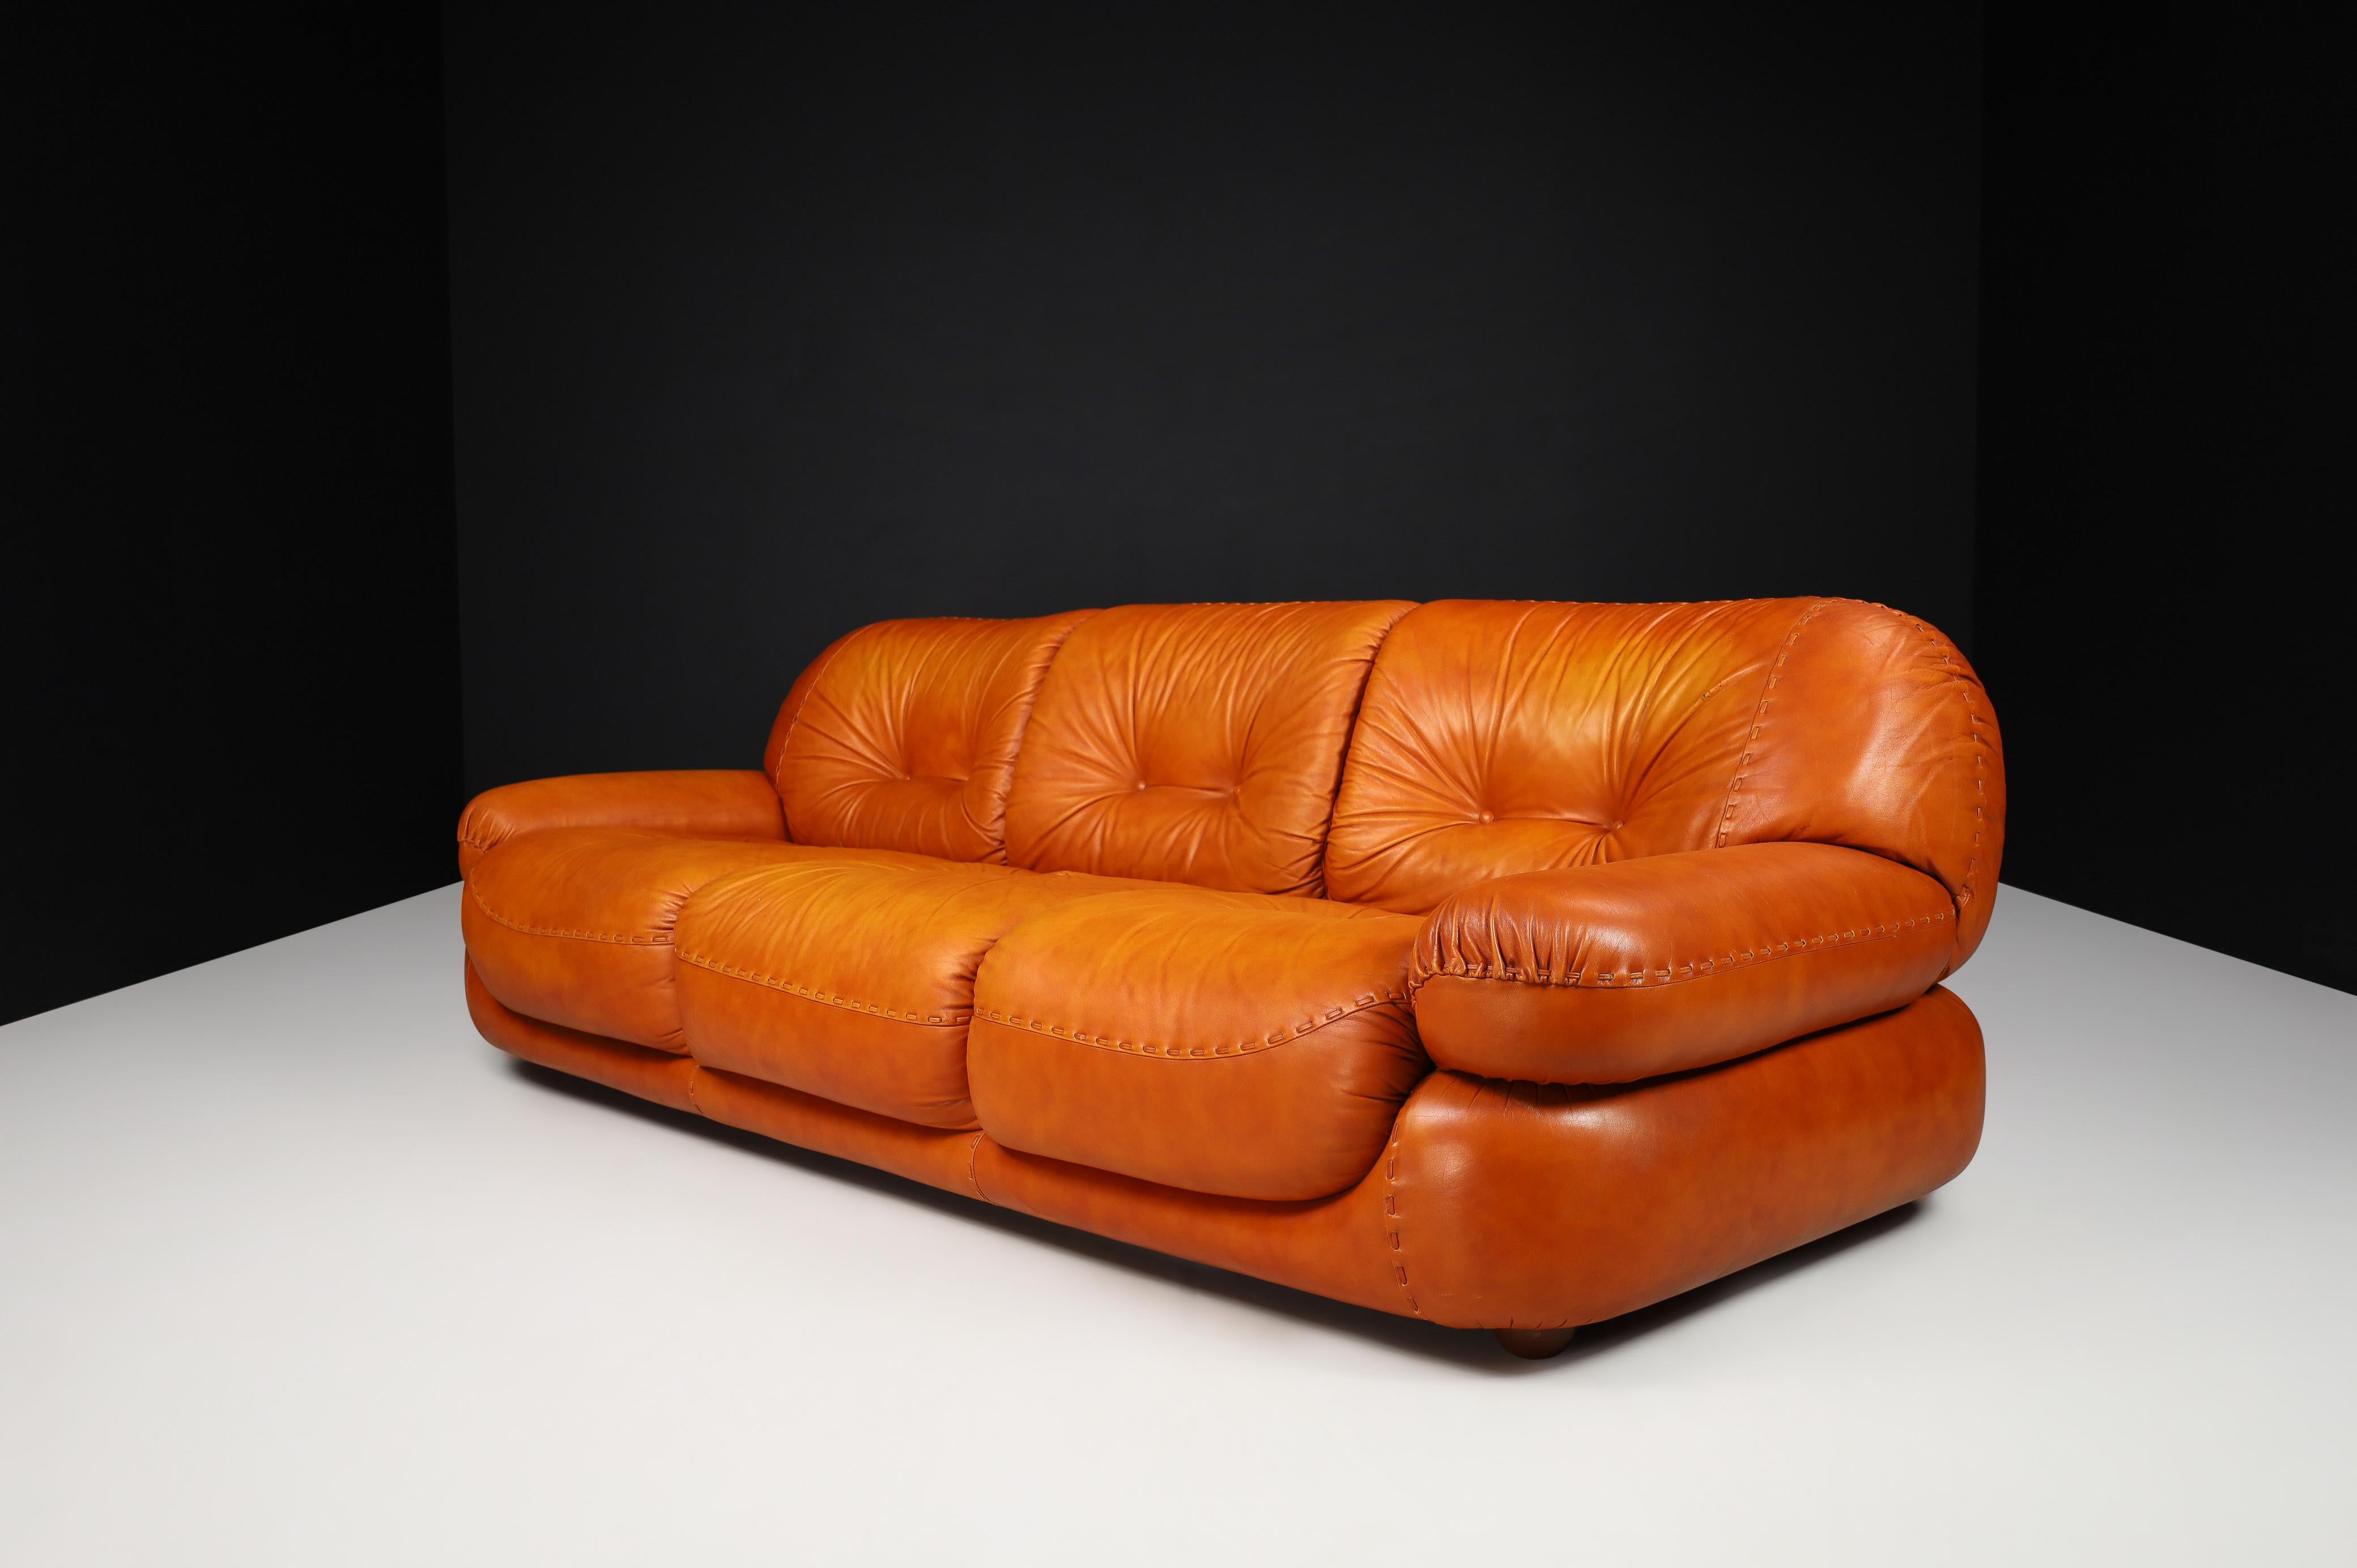 Large lounge sofa in cognac Leather by Sapporo for Mobil Girgi, Italy 1970.

A large lounge sofa in leather by Sapporo for Mobil Girgi, Italy, in the 1970s. A large, fluffy, stylish lounge sofa that feature round lines and shapes invite you to